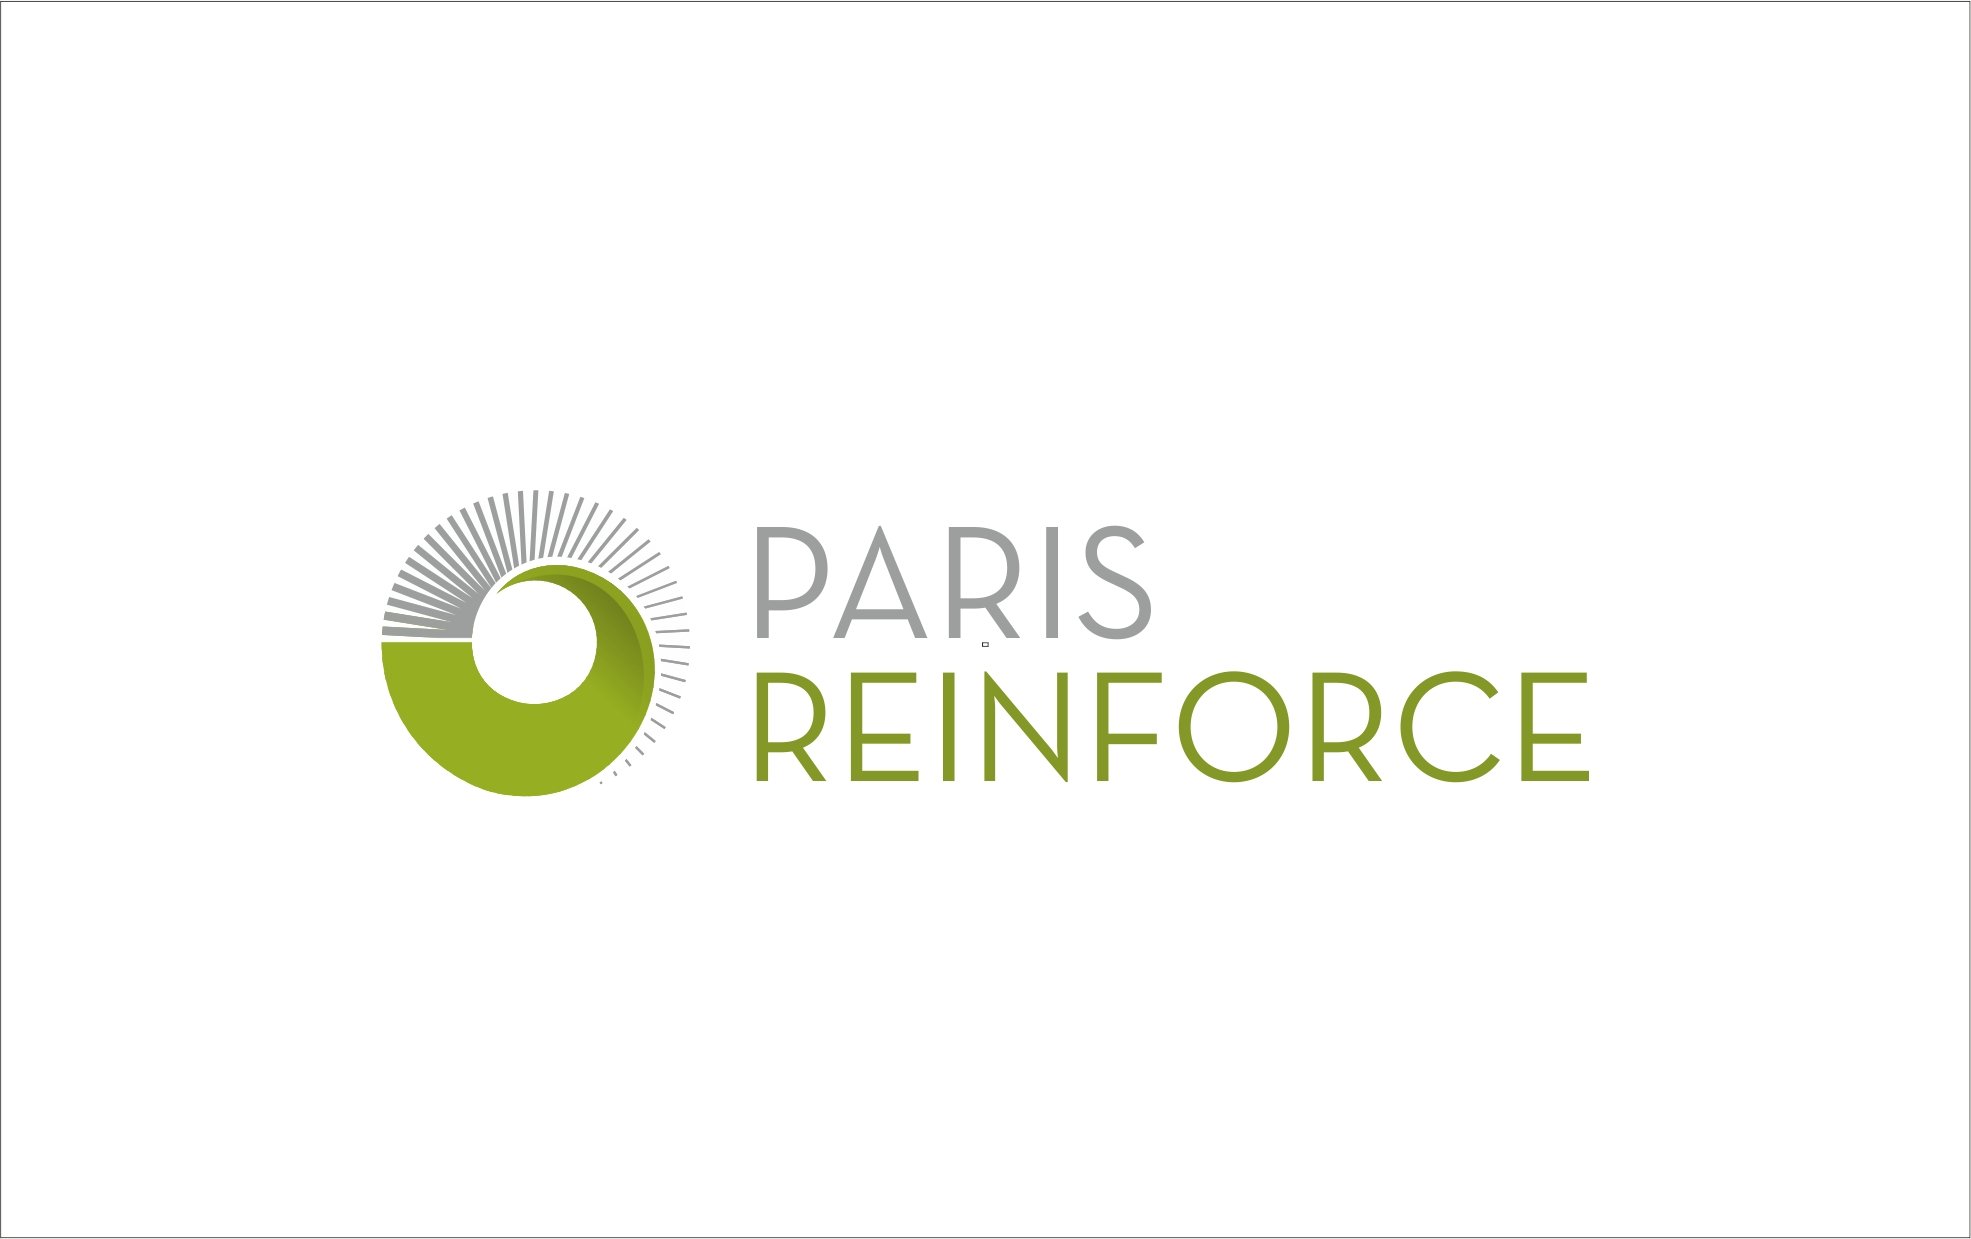 #PARISREINFORCE is a #H2020 #research & #innovation project aiming to tackle #climatechange, support countries to develop their #NDCs, & boost #ParisAgreement